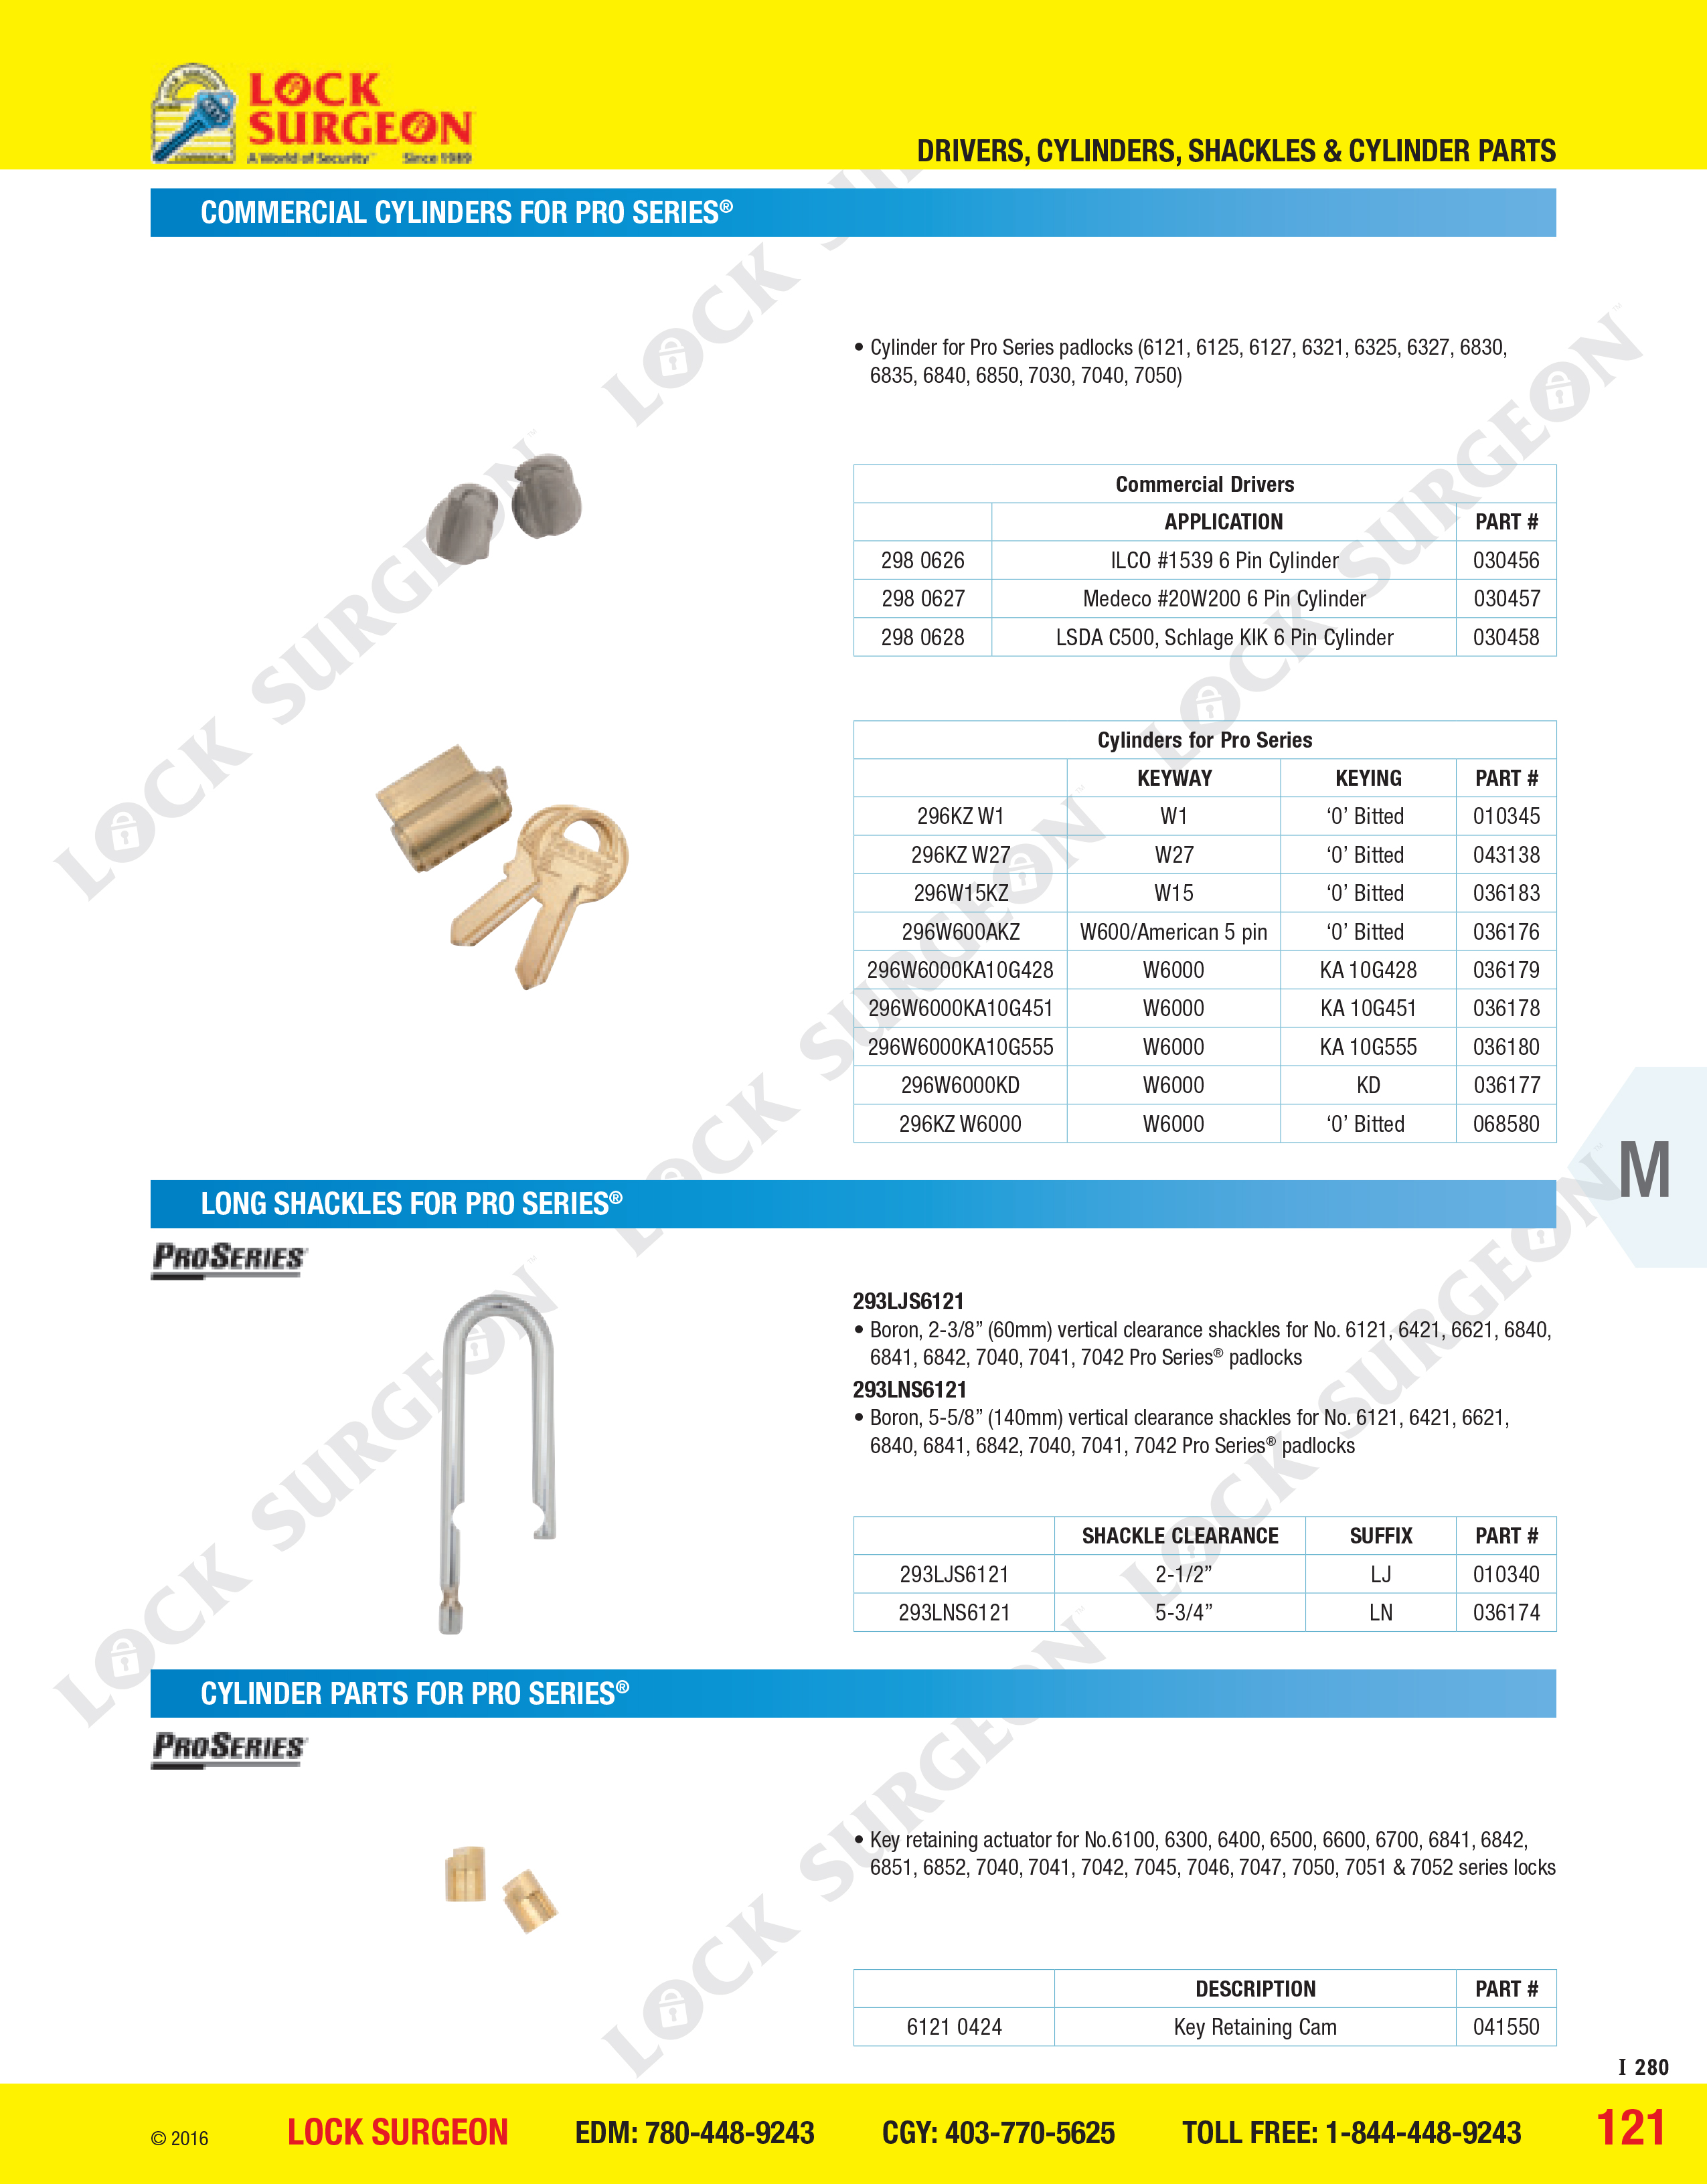 Master Lock Commercial cylinders for Pro Series, long shackles Cylinder parts for Pro Series®